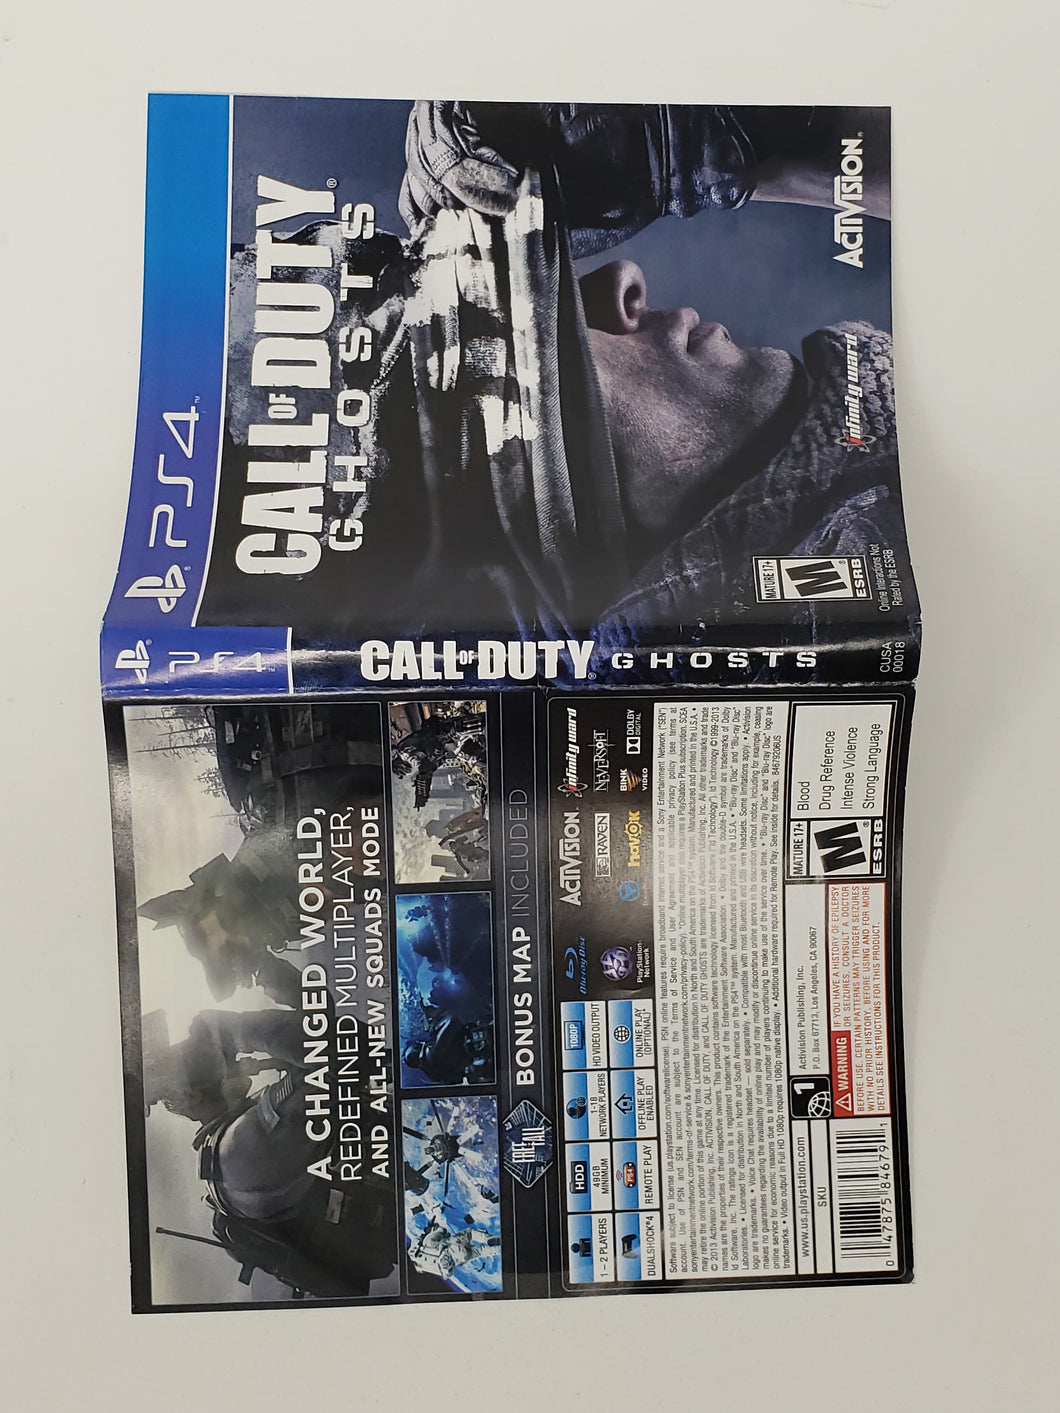 Call of Duty Ghosts [Cover art] - Sony Playstation 4 | PS4